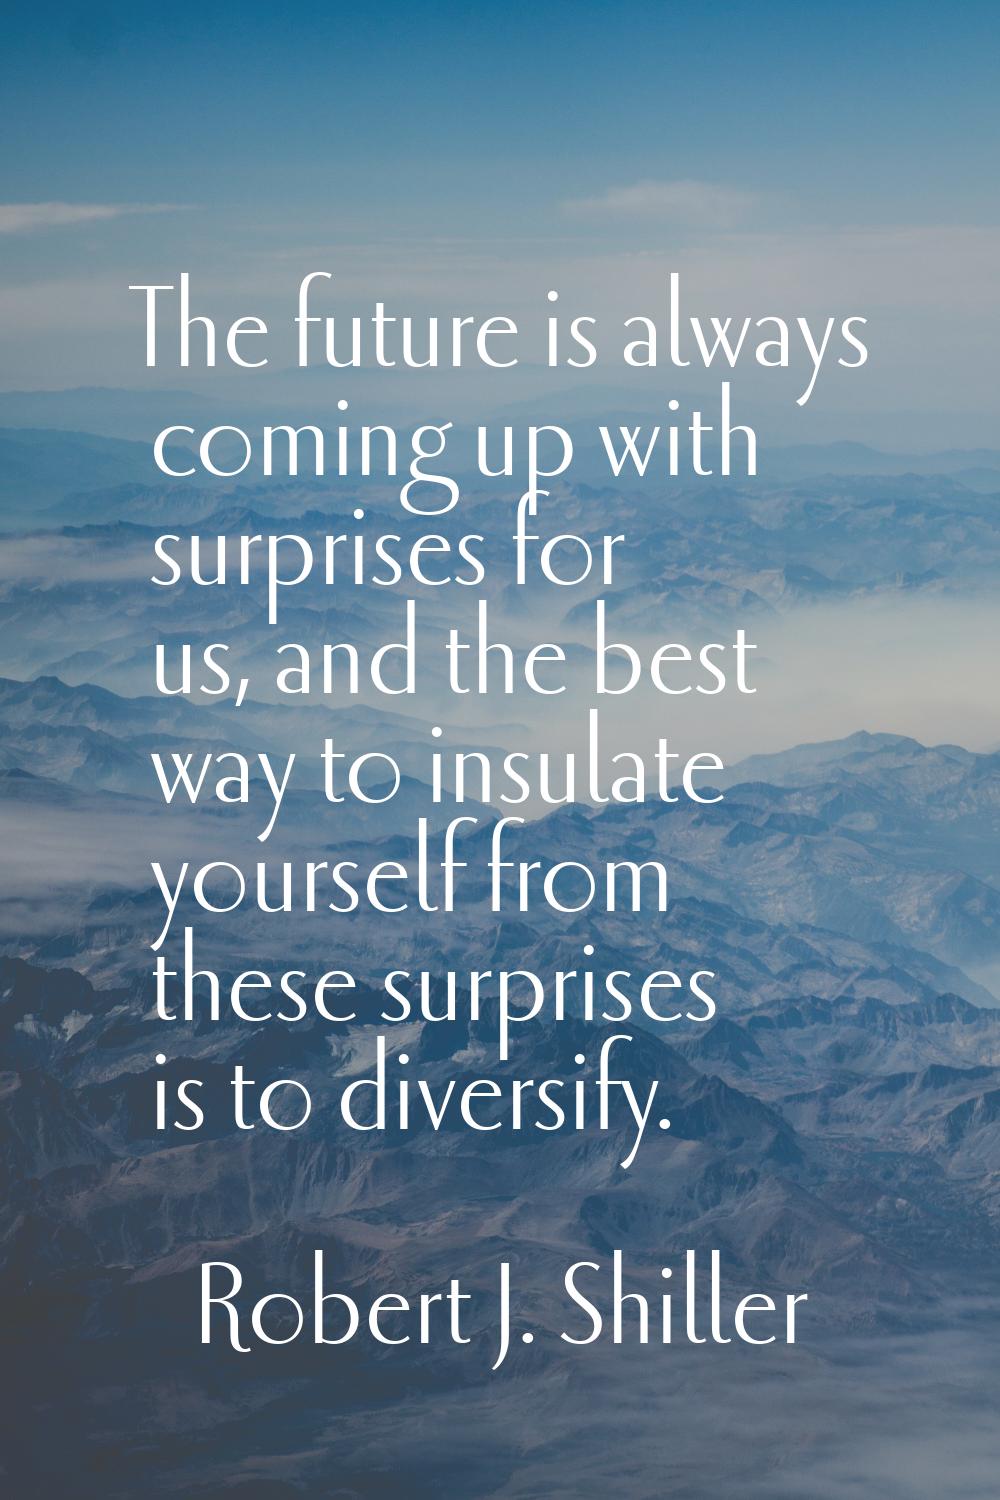 The future is always coming up with surprises for us, and the best way to insulate yourself from th